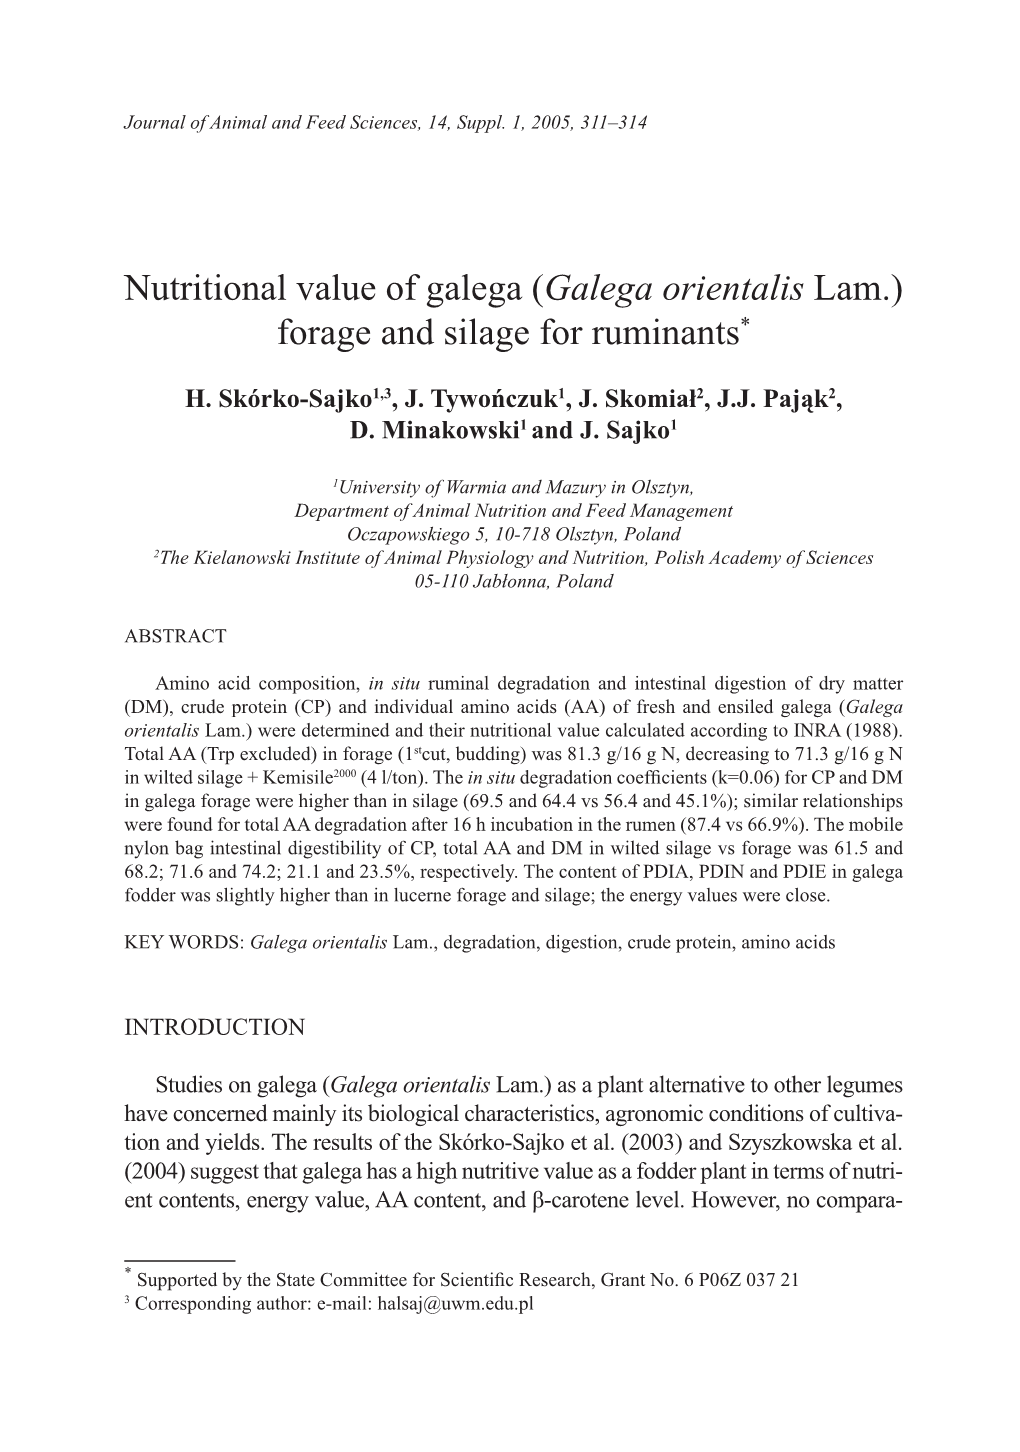 Nutritional Value of Galega (Galega Orientalis Lam.) Forage and Silage for Ruminants*